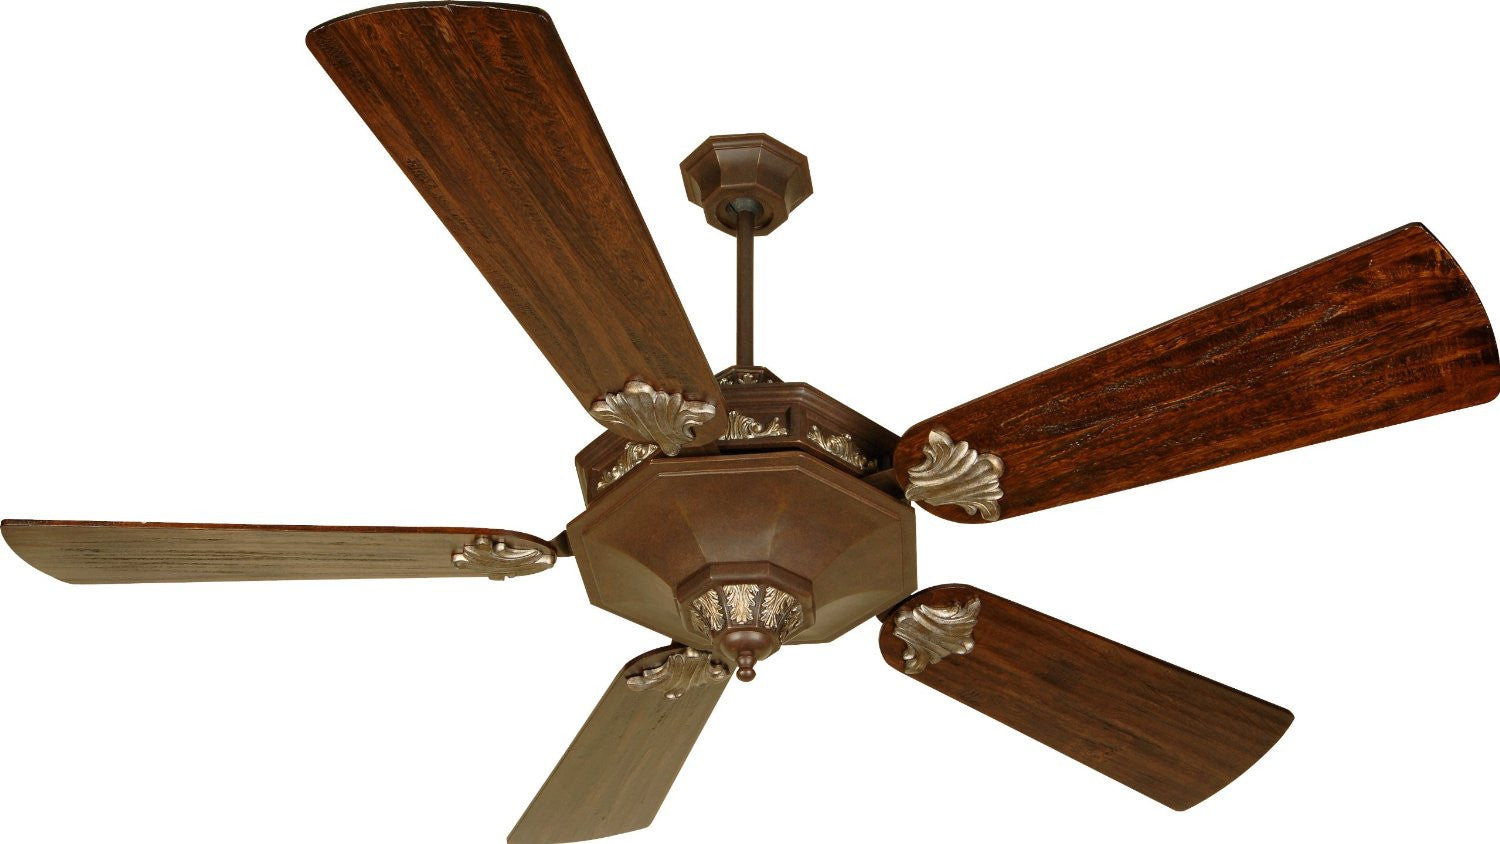 Craftmade BE60AGVM-B552P-WB6 Beaumont Model Ceiling Fan in Aged Bronze Vintage Madera Finish